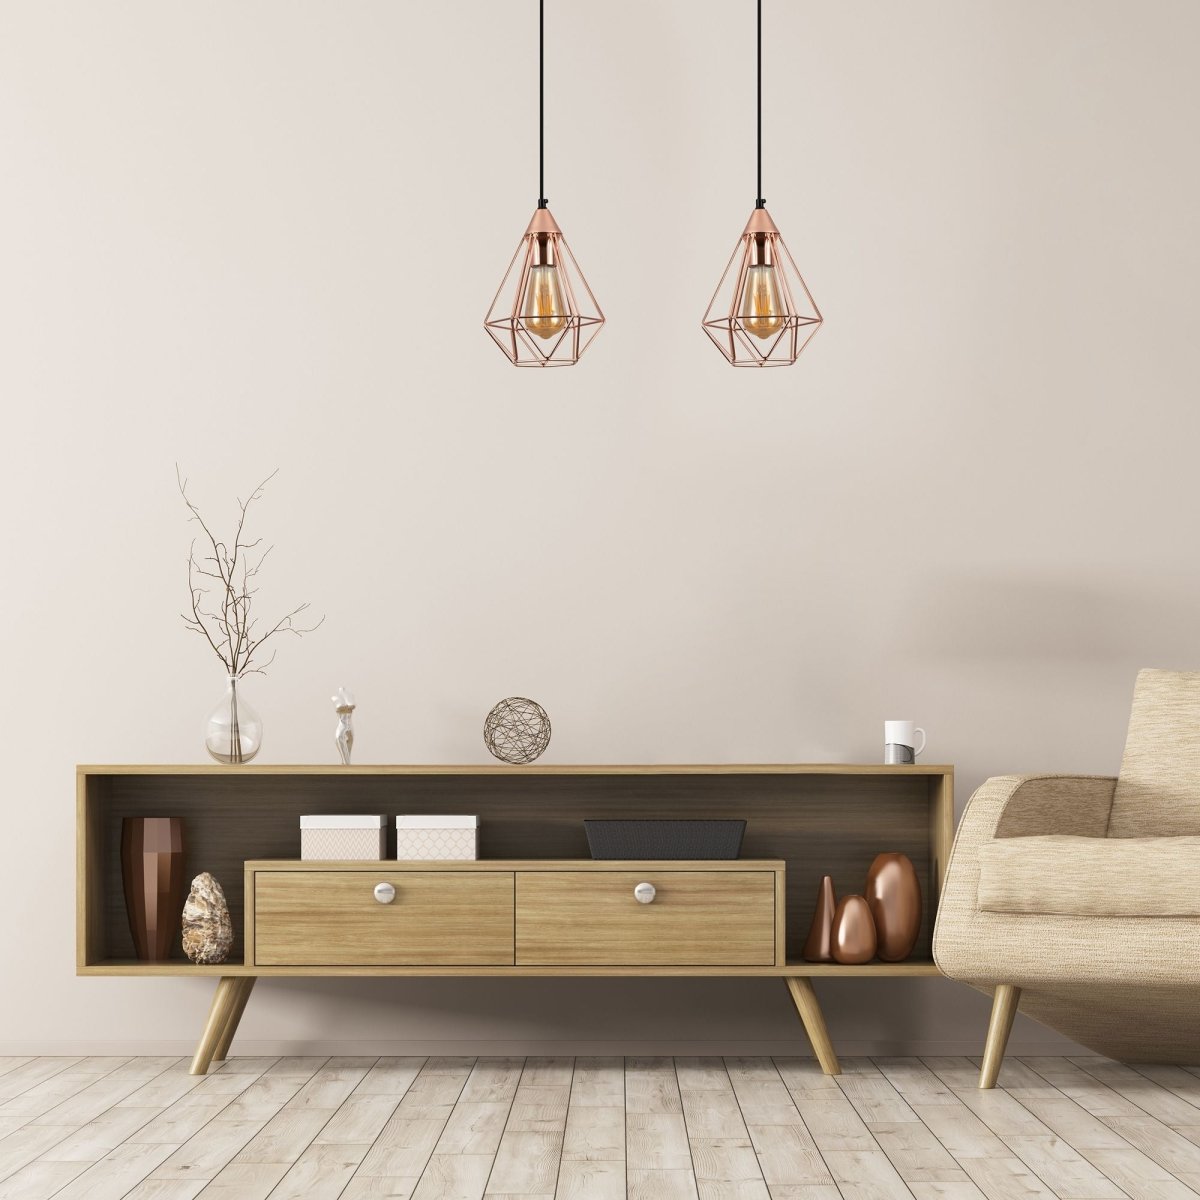 Rose gold metal cage pendant light s with e27 fitting in indoor setting living reading room dining room